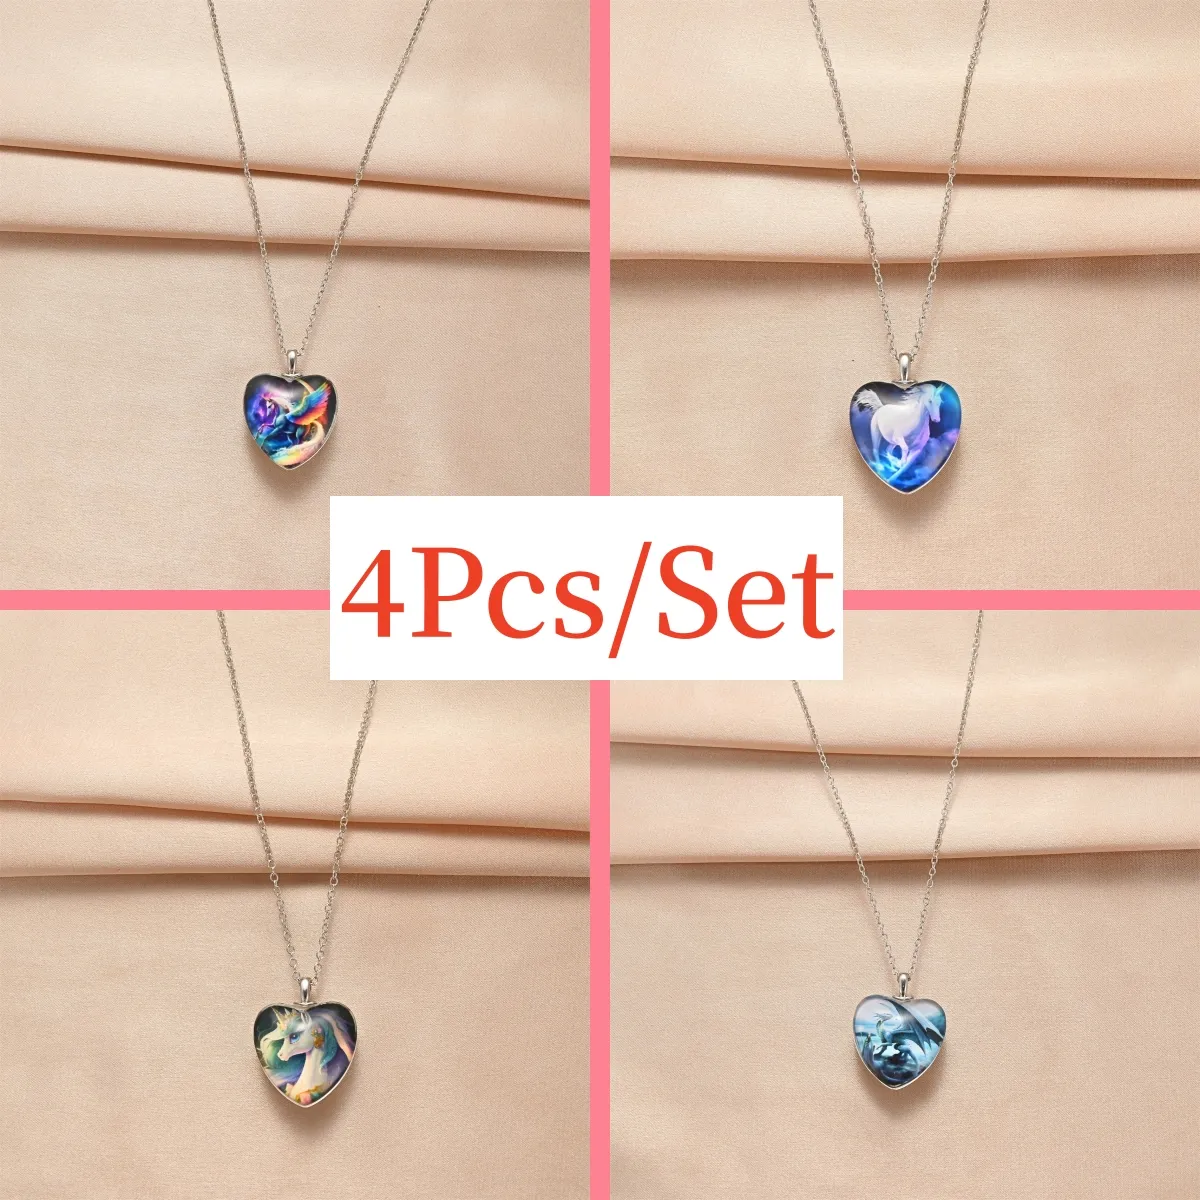 4pcs Trendy Exquisite Unicorn Heart-shaped Necklaces, Creative Pendant  Necklace, Cute Necklace, Party Jewelry, Holiday Birthday Gift For Friends